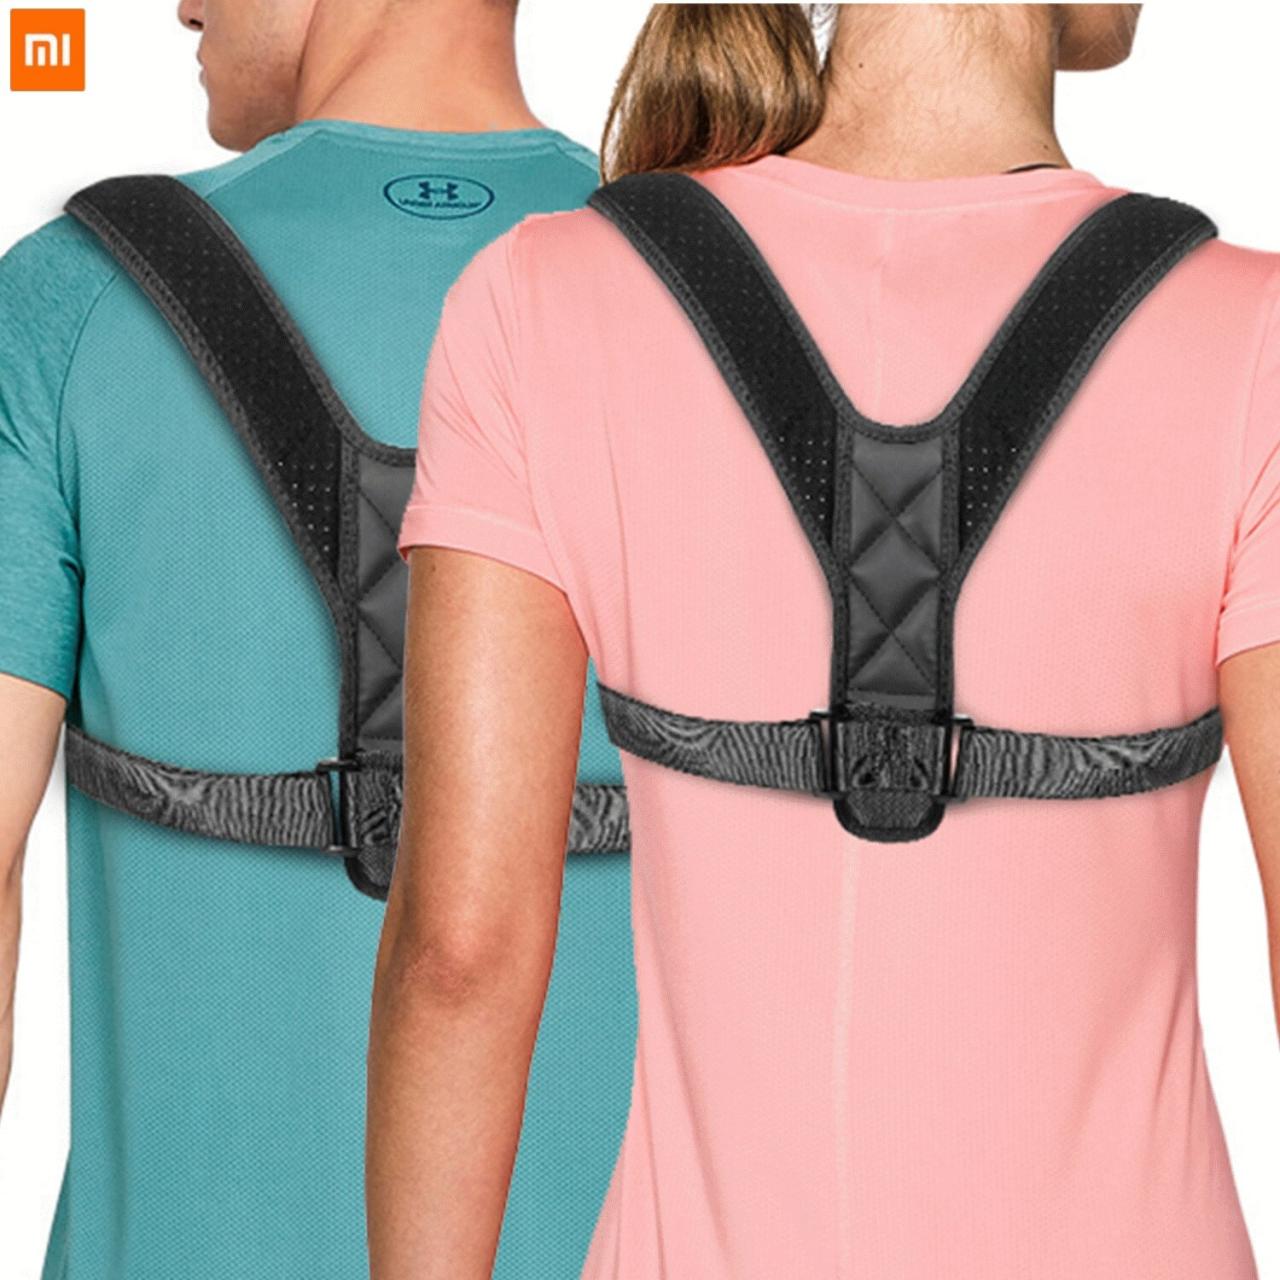 Gearari Posture Corrector Will Seriously Save Your Back